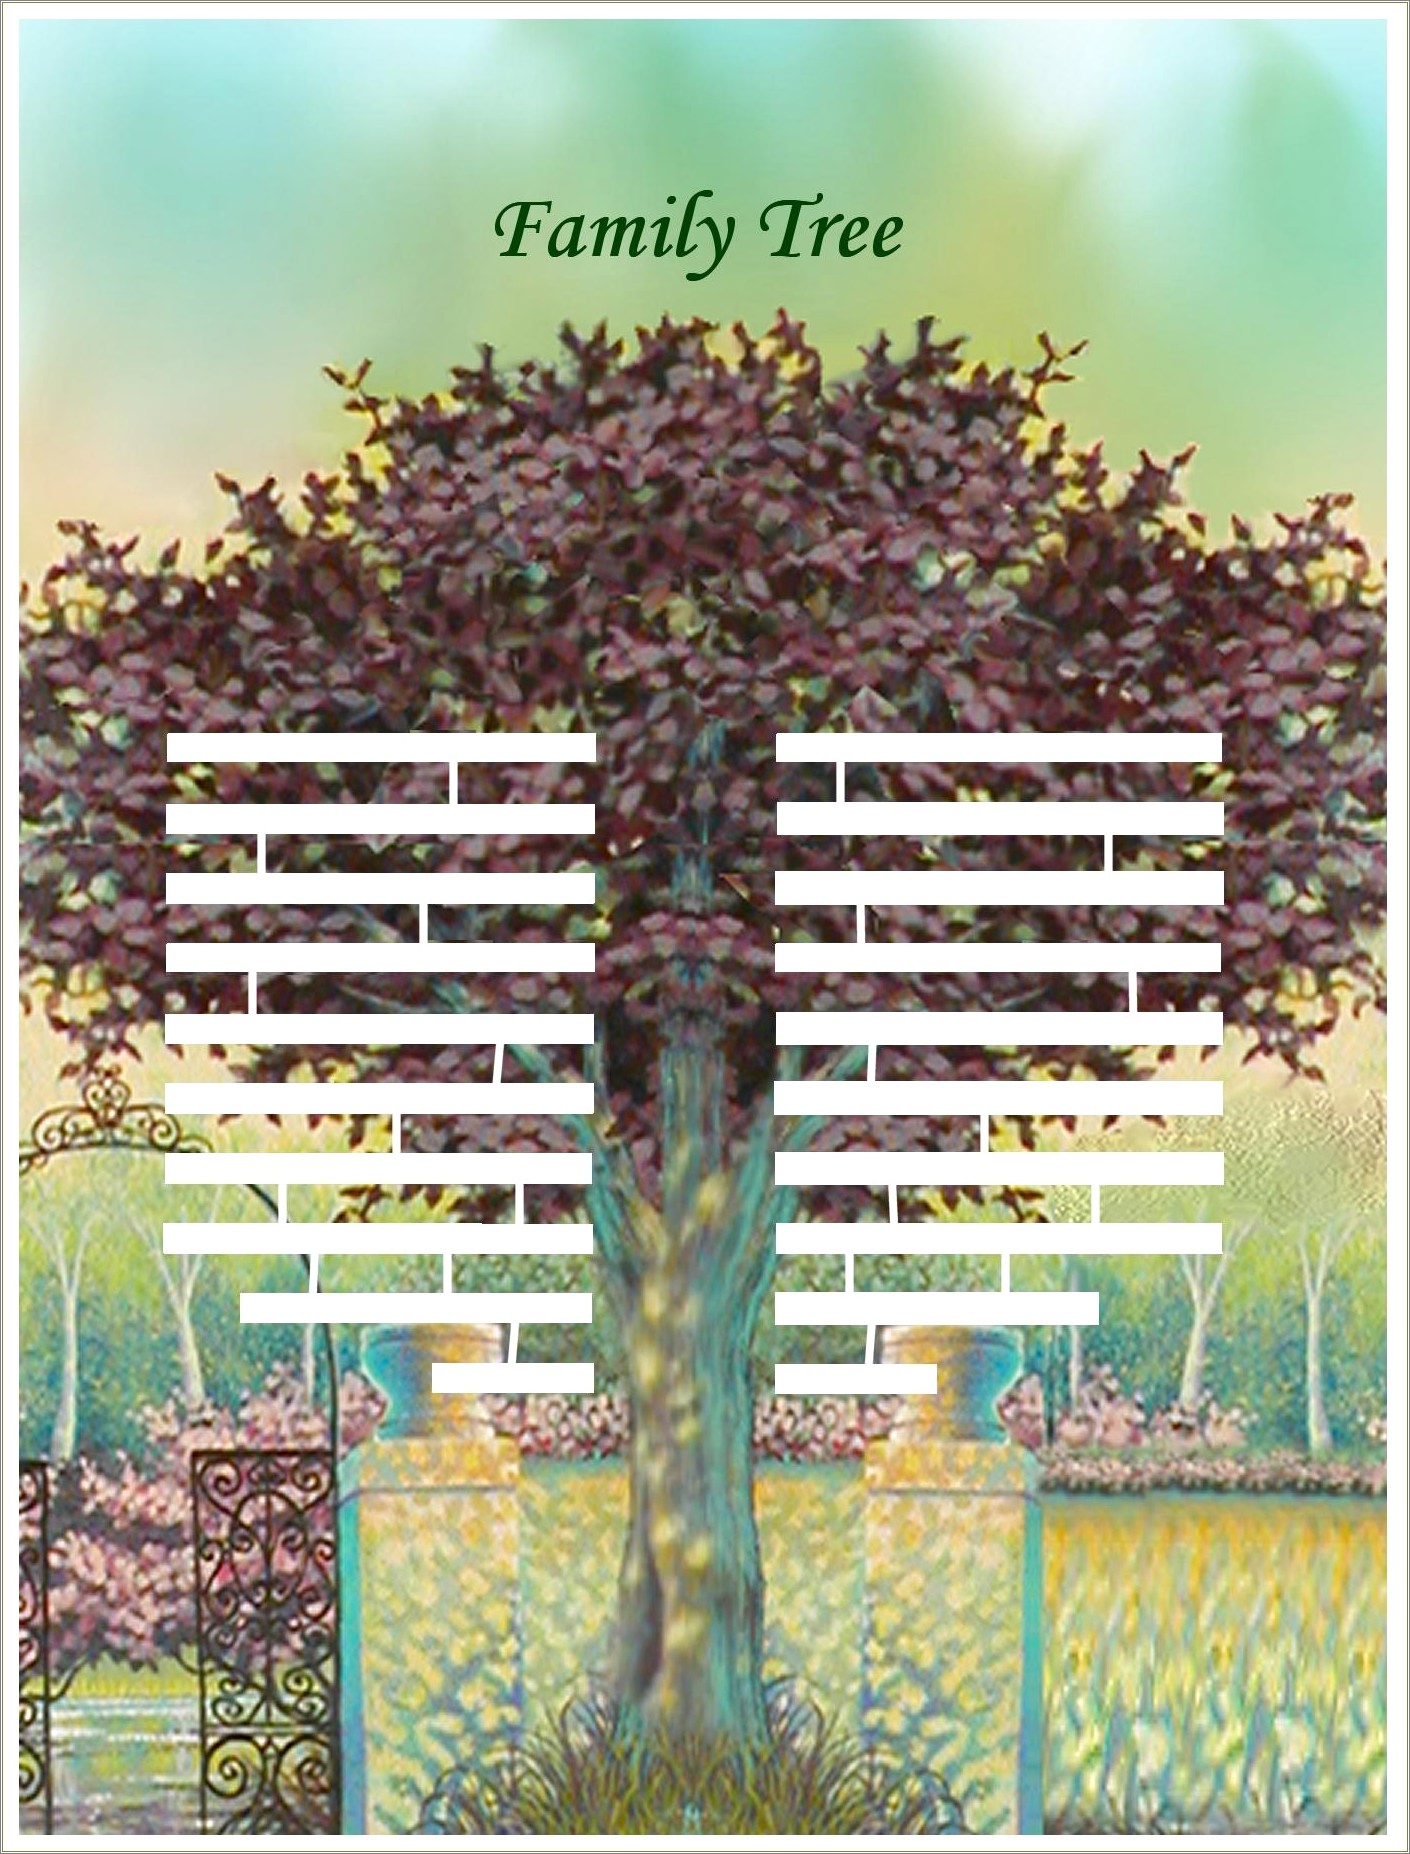 Free Family Reunion Flyers Templates Words